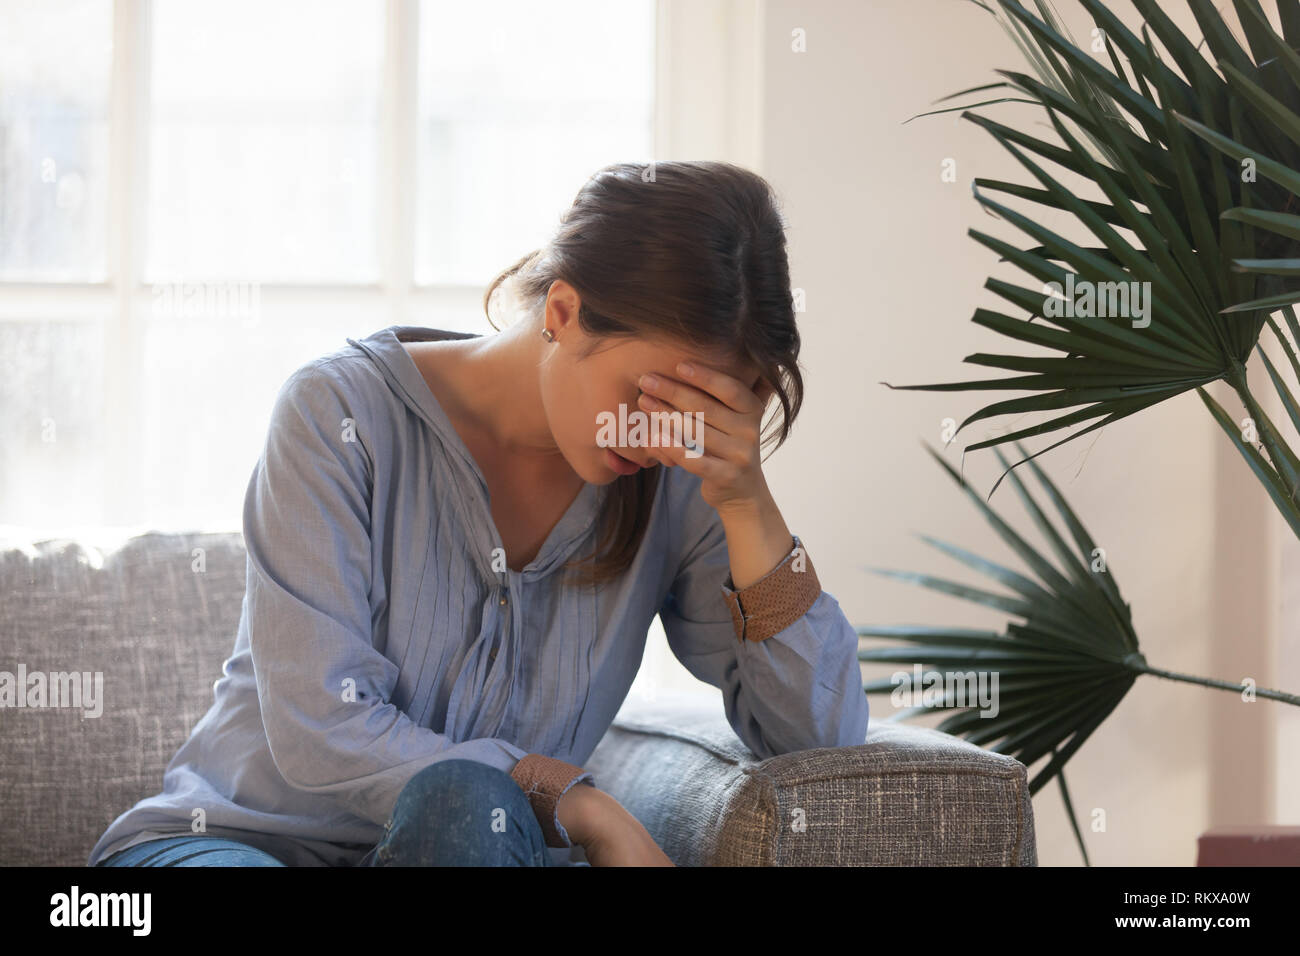 Upset depressed woman feeling tired having headache sitting on couch Stock Photo